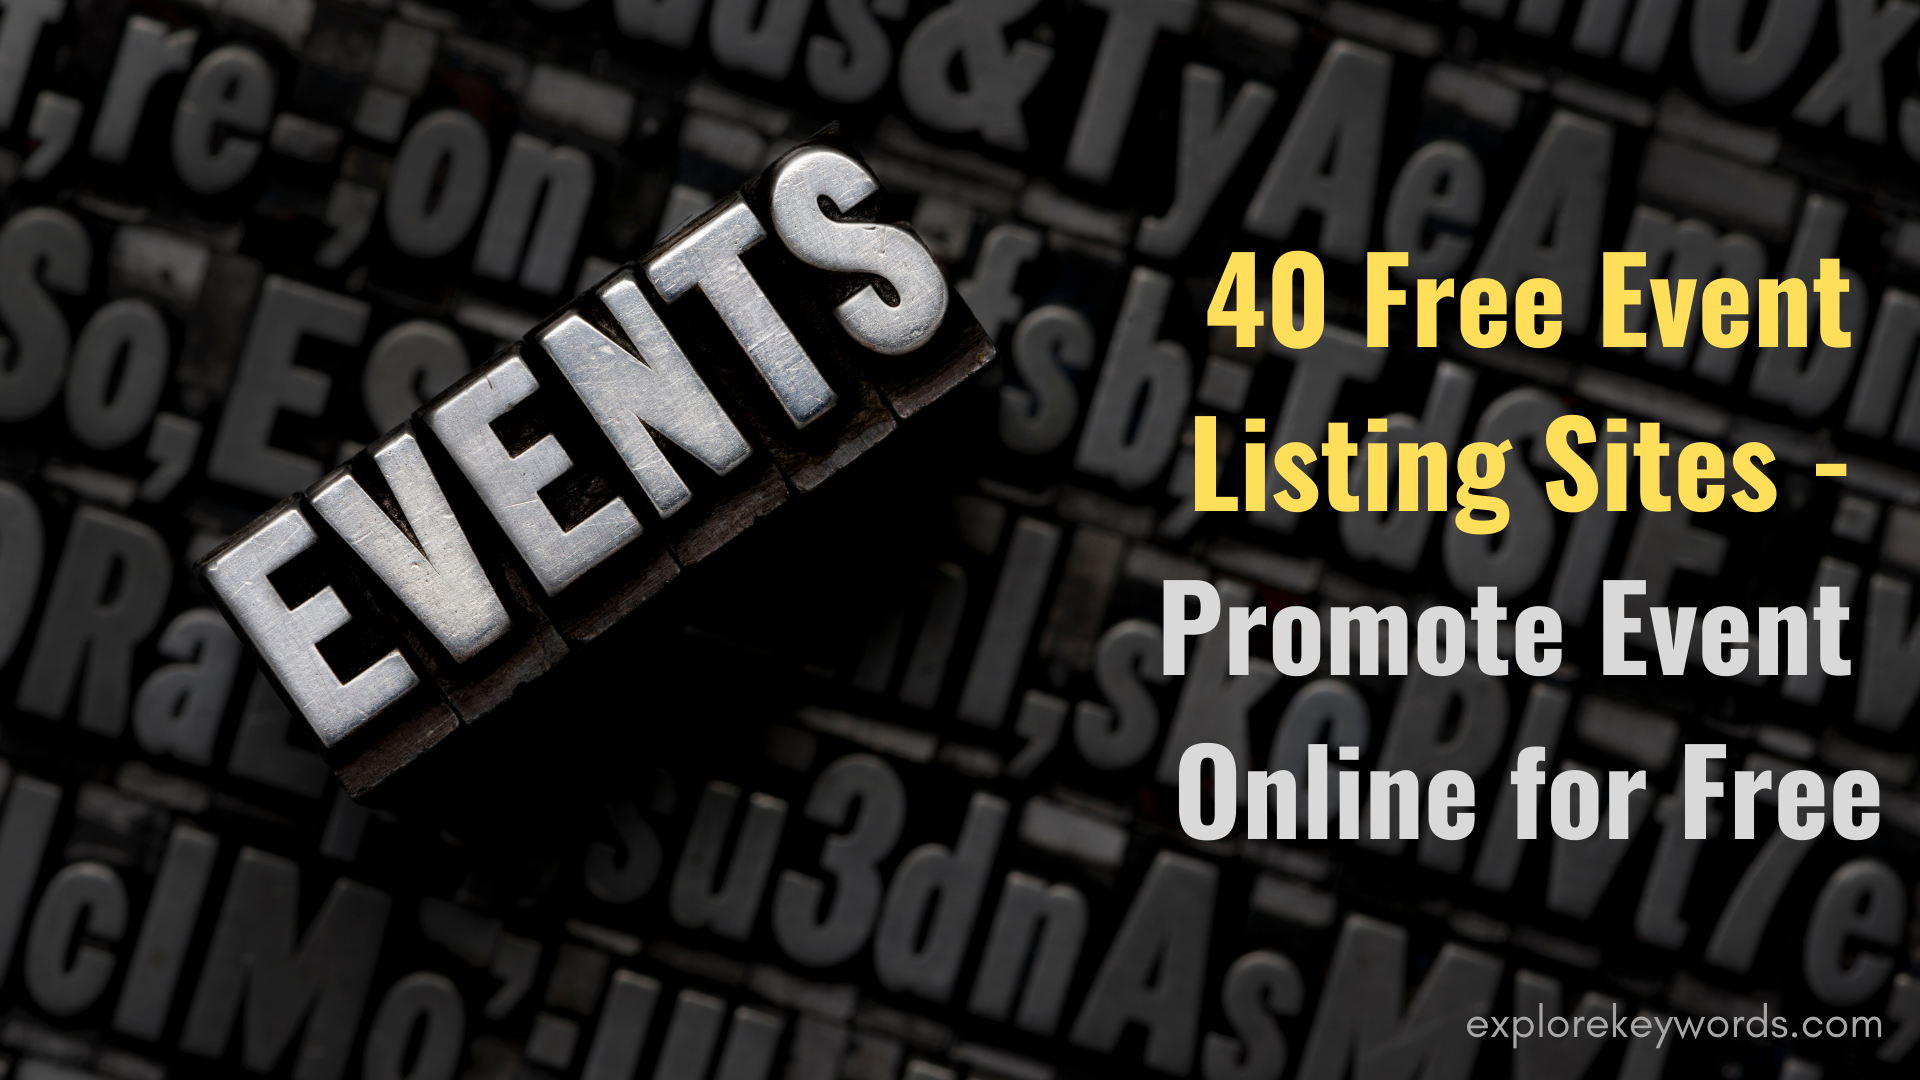 40 Free Event Listing Sites - Promote Event Online for Free